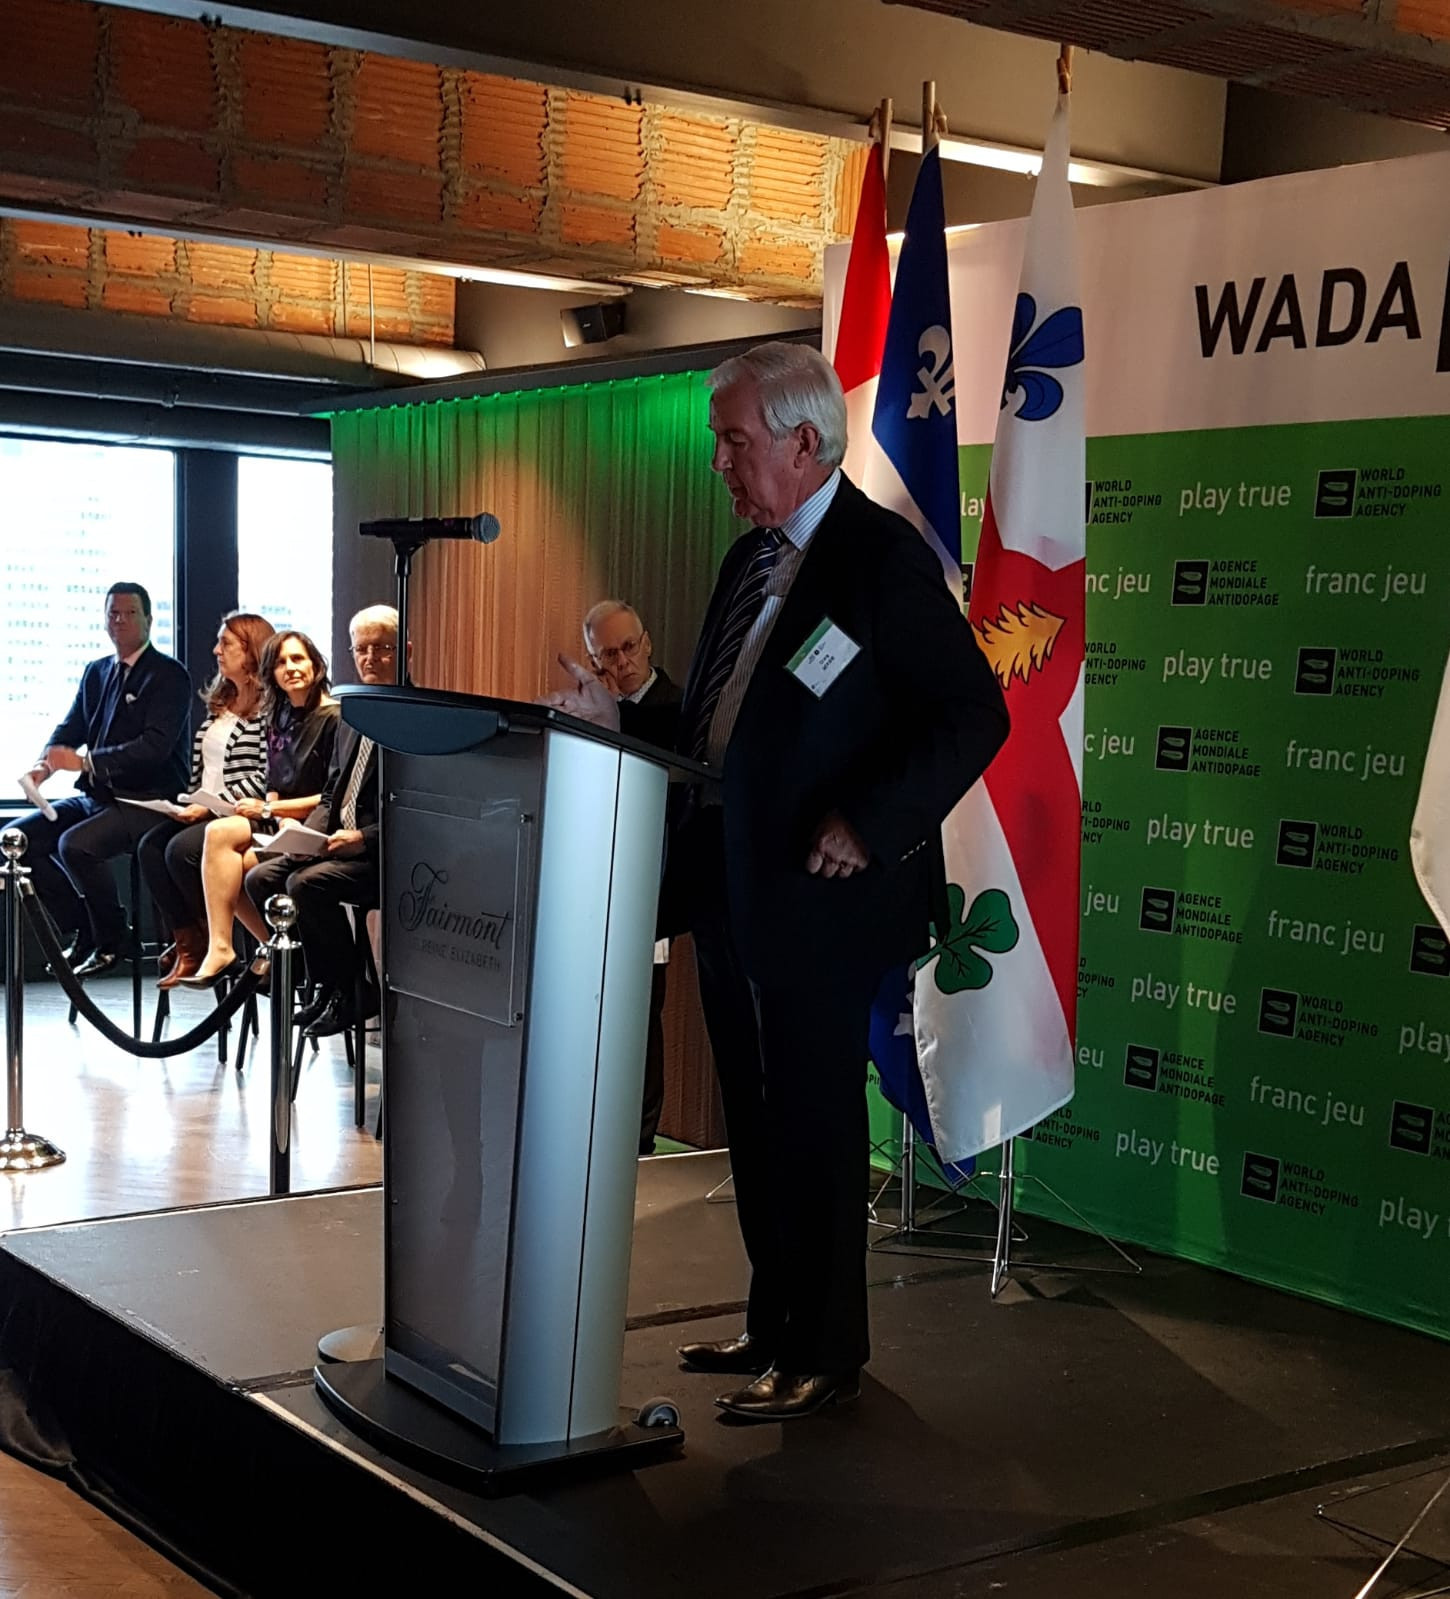 WADA celebrates extension of Montreal hosting agreement at Lennon hotel